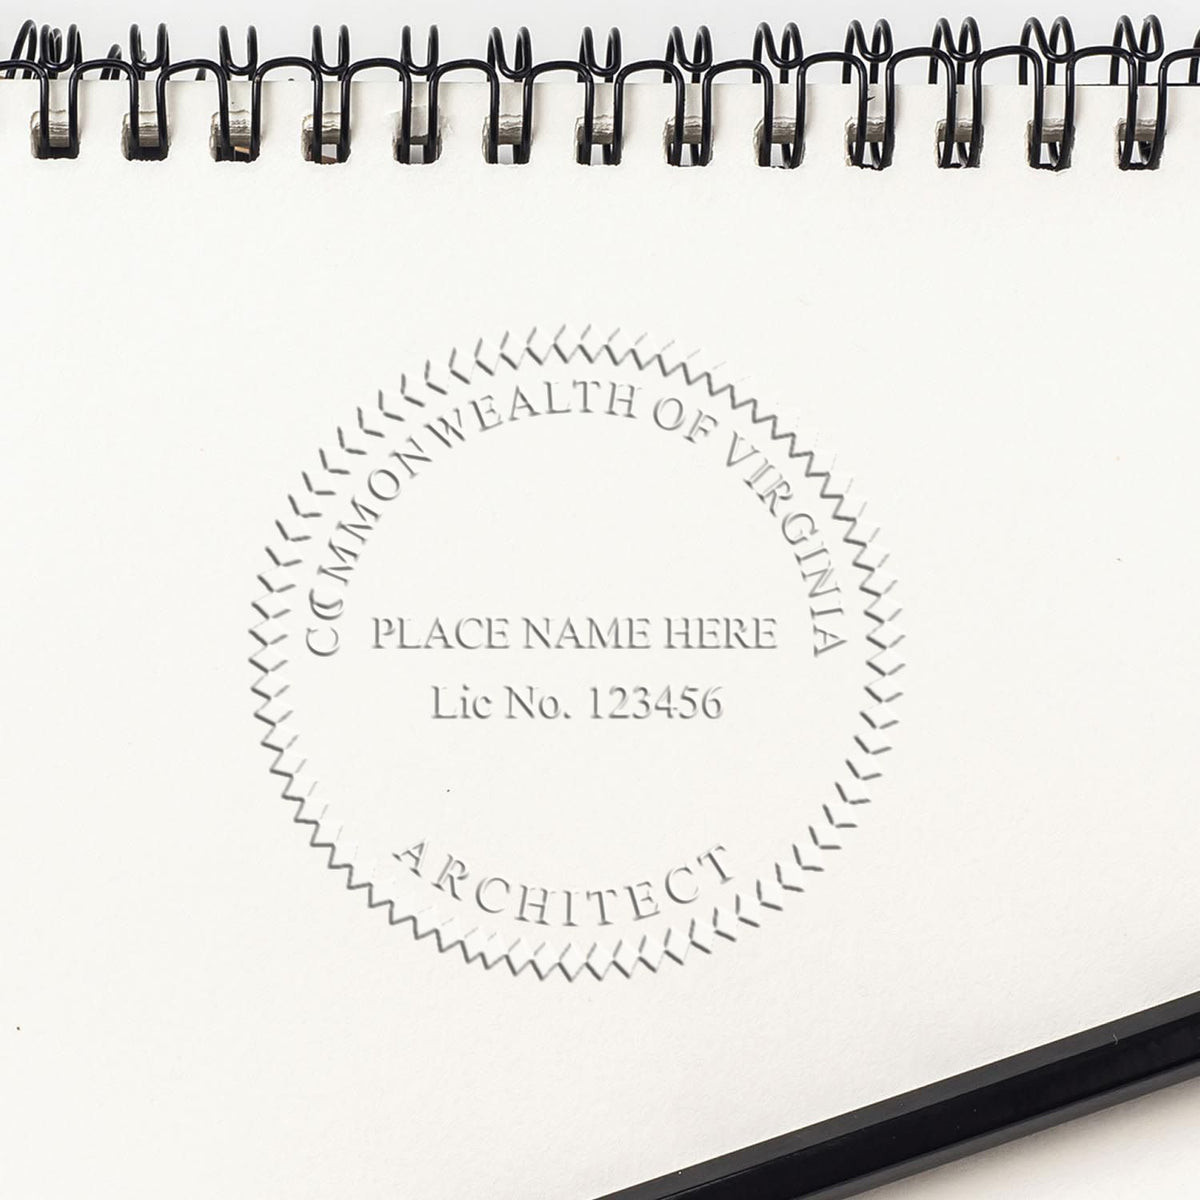 A photograph of the Hybrid Virginia Architect Seal stamp impression reveals a vivid, professional image of the on paper.